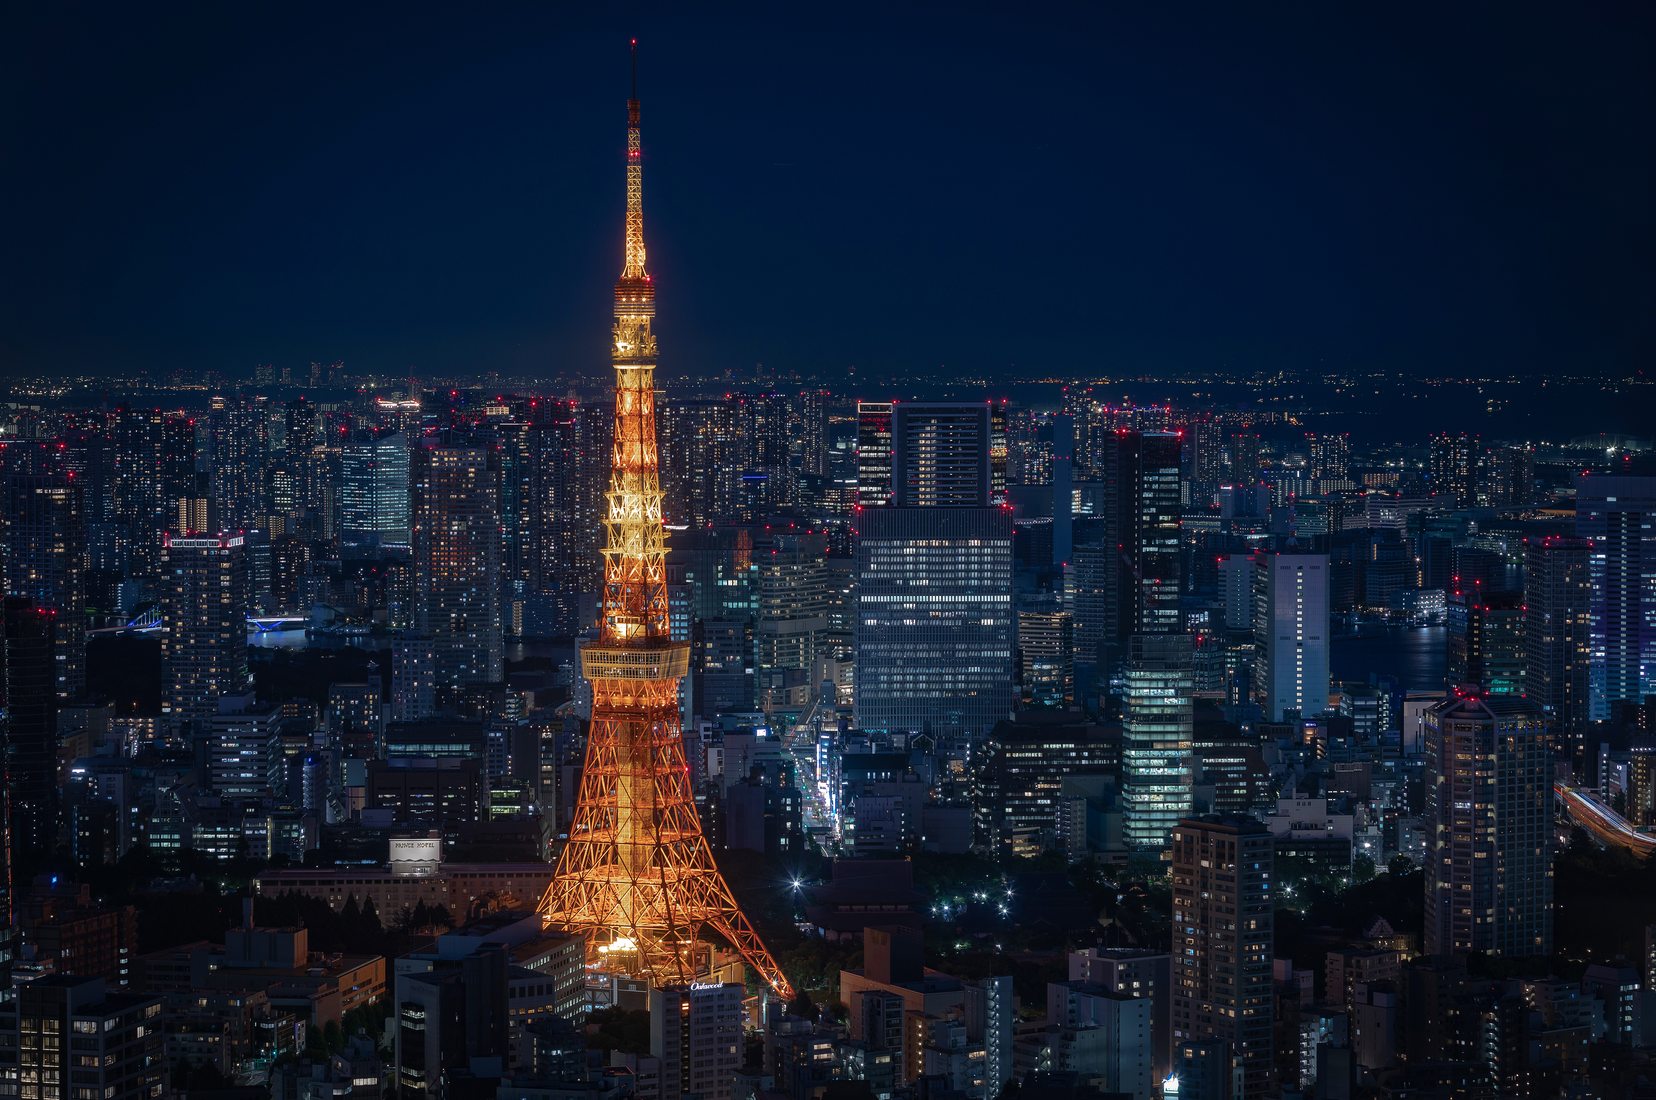 View of Tokyo Tower from Roppongi Tower, Japan